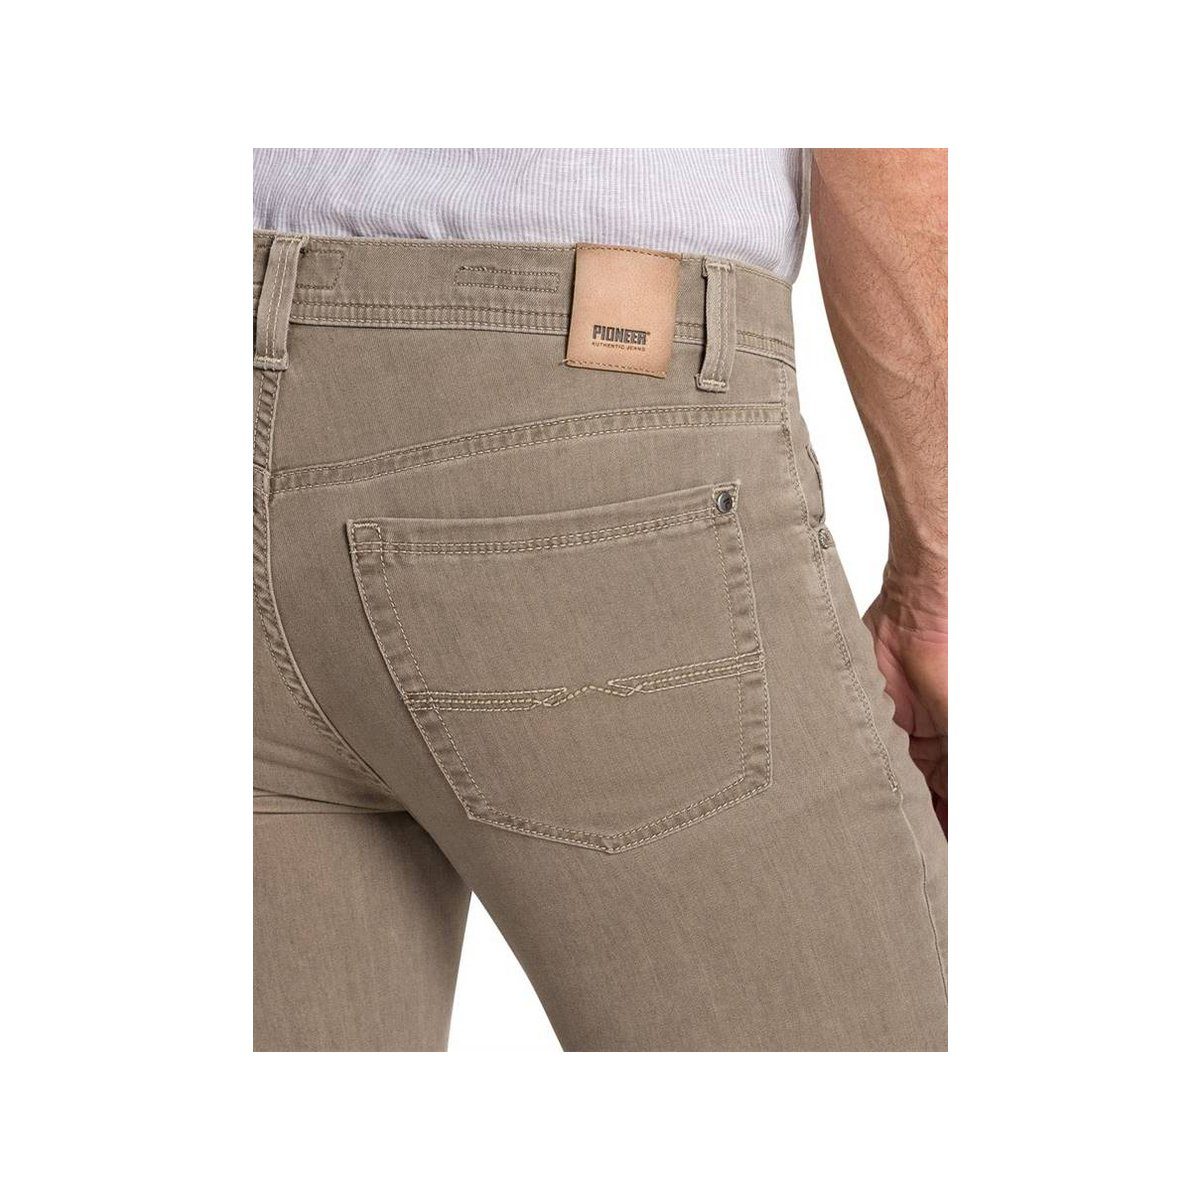 Pioneer stonewash (1-tlg) Jeans Authentic 8841 5-Pocket-Jeans light hell-braun brown